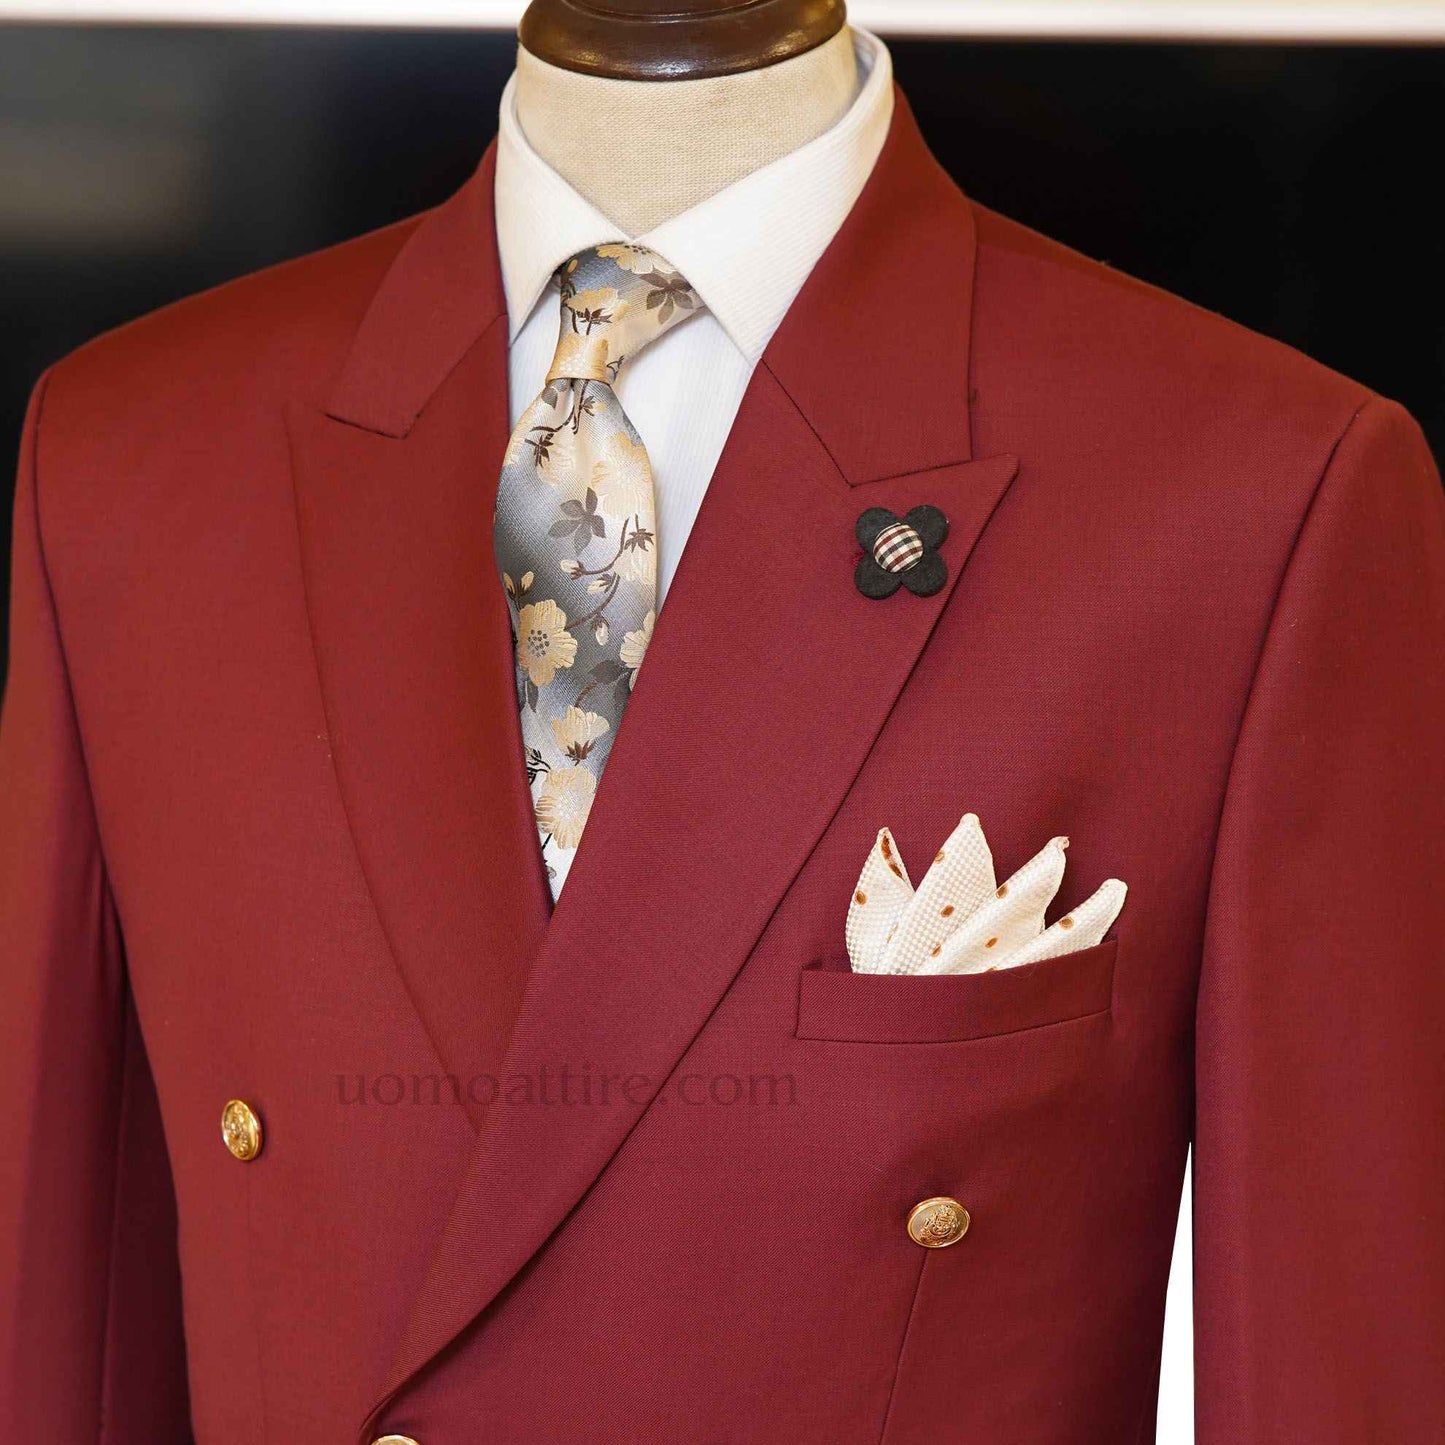 Maroon double breasted suit with golden buttons, double breasted suit, double breasted suits for men